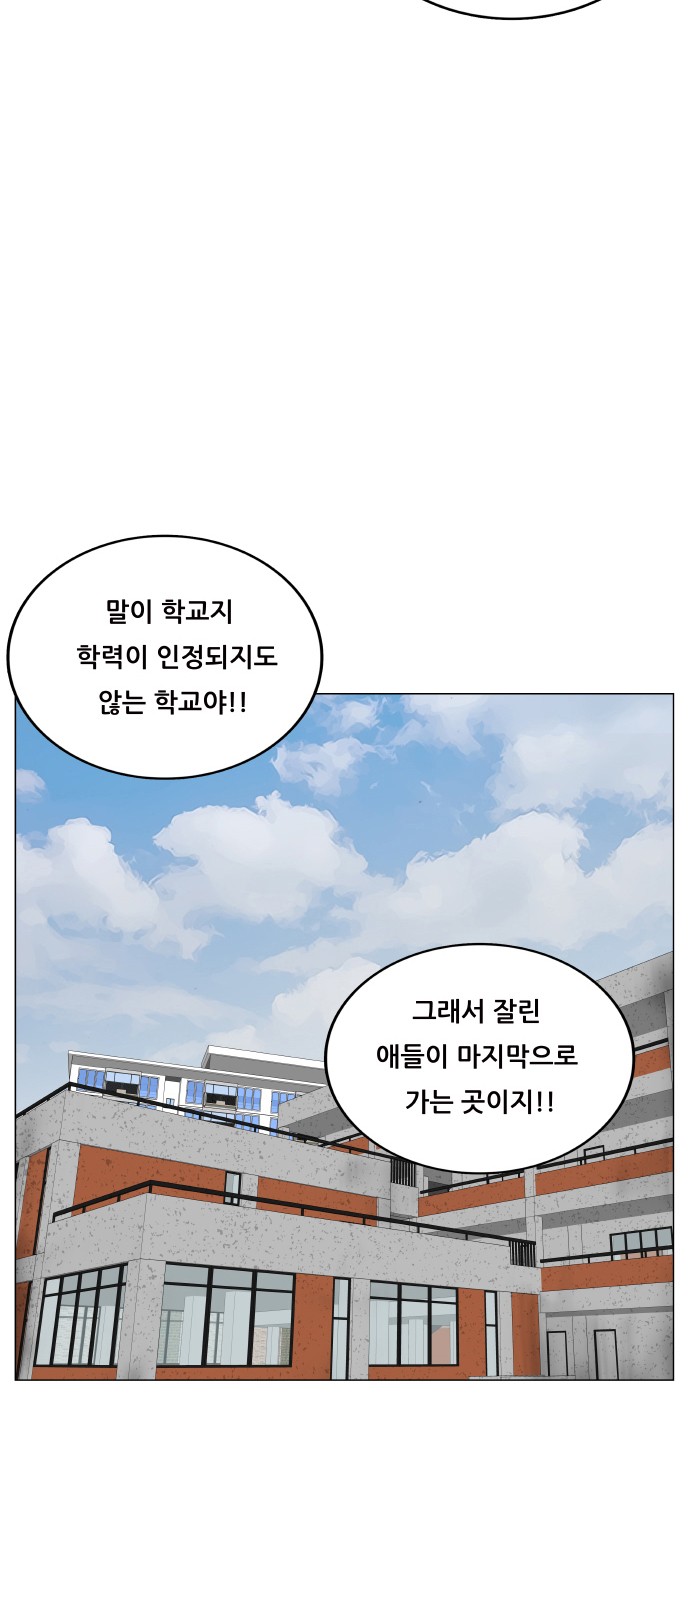 Ultimate Legend - Kang Hae Hyo - Chapter 438 - Page 2